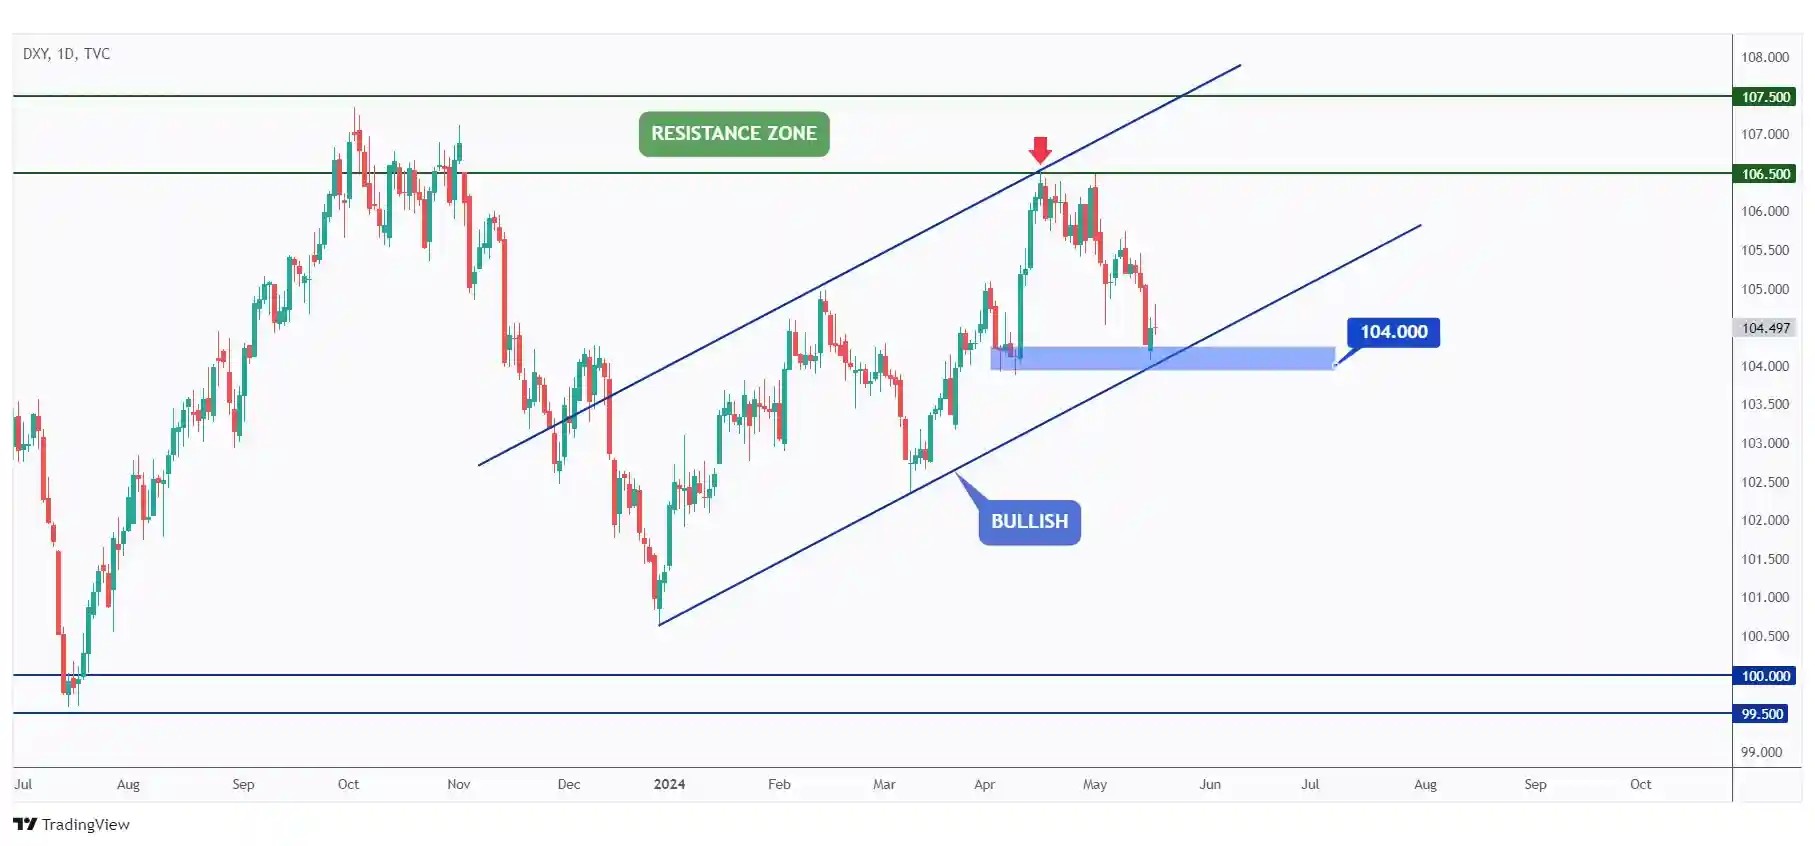 DXY daily chart overall bullish trading within the rising channel and currently hovering around the lower bound of the channel at $104.